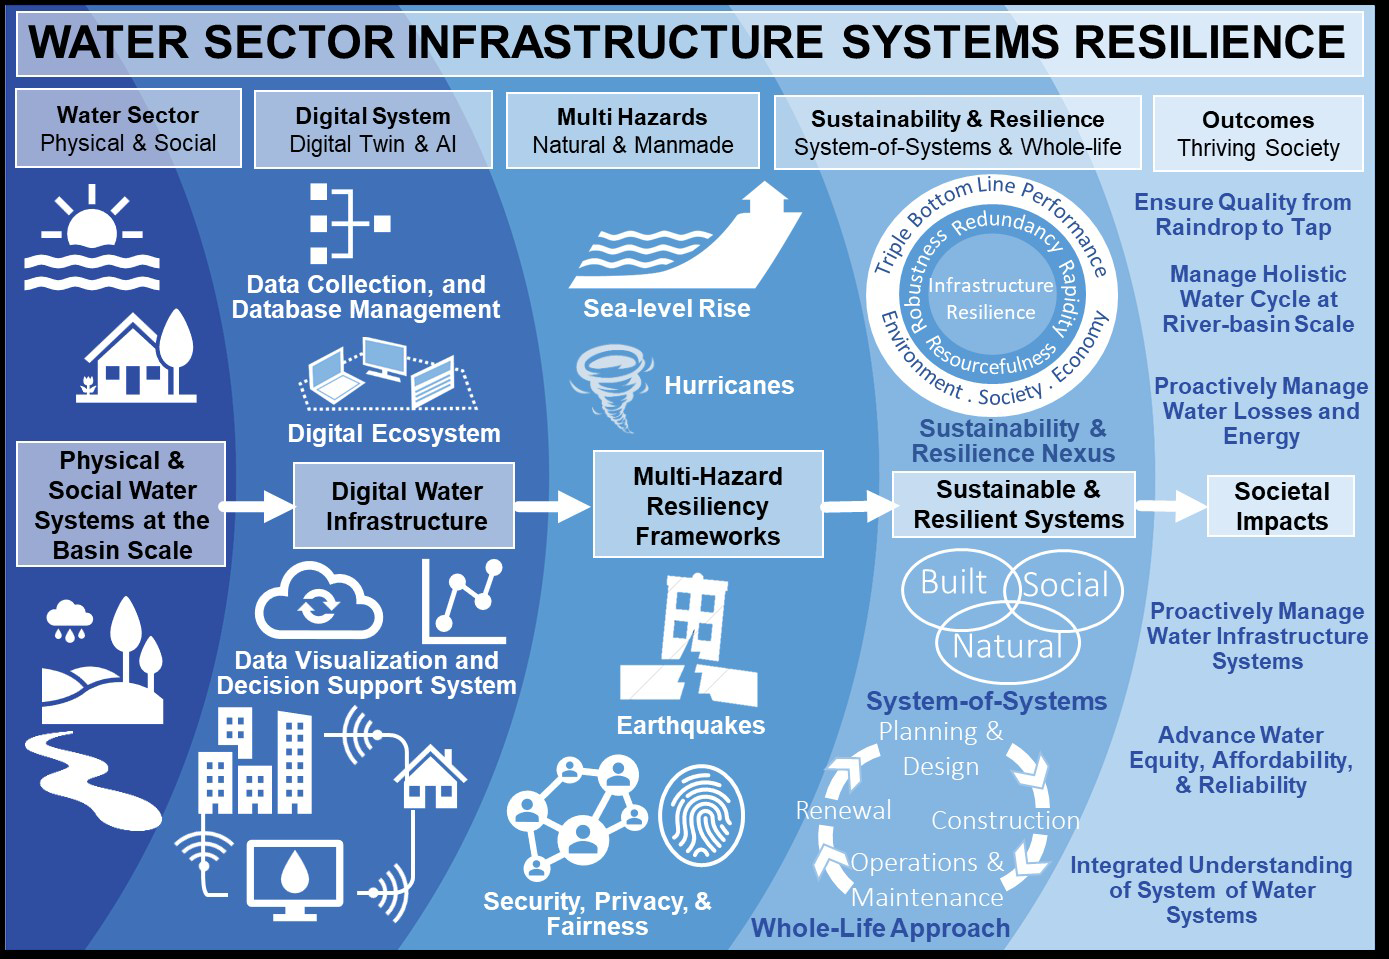 Water sector infrastructure systems resilience: A social